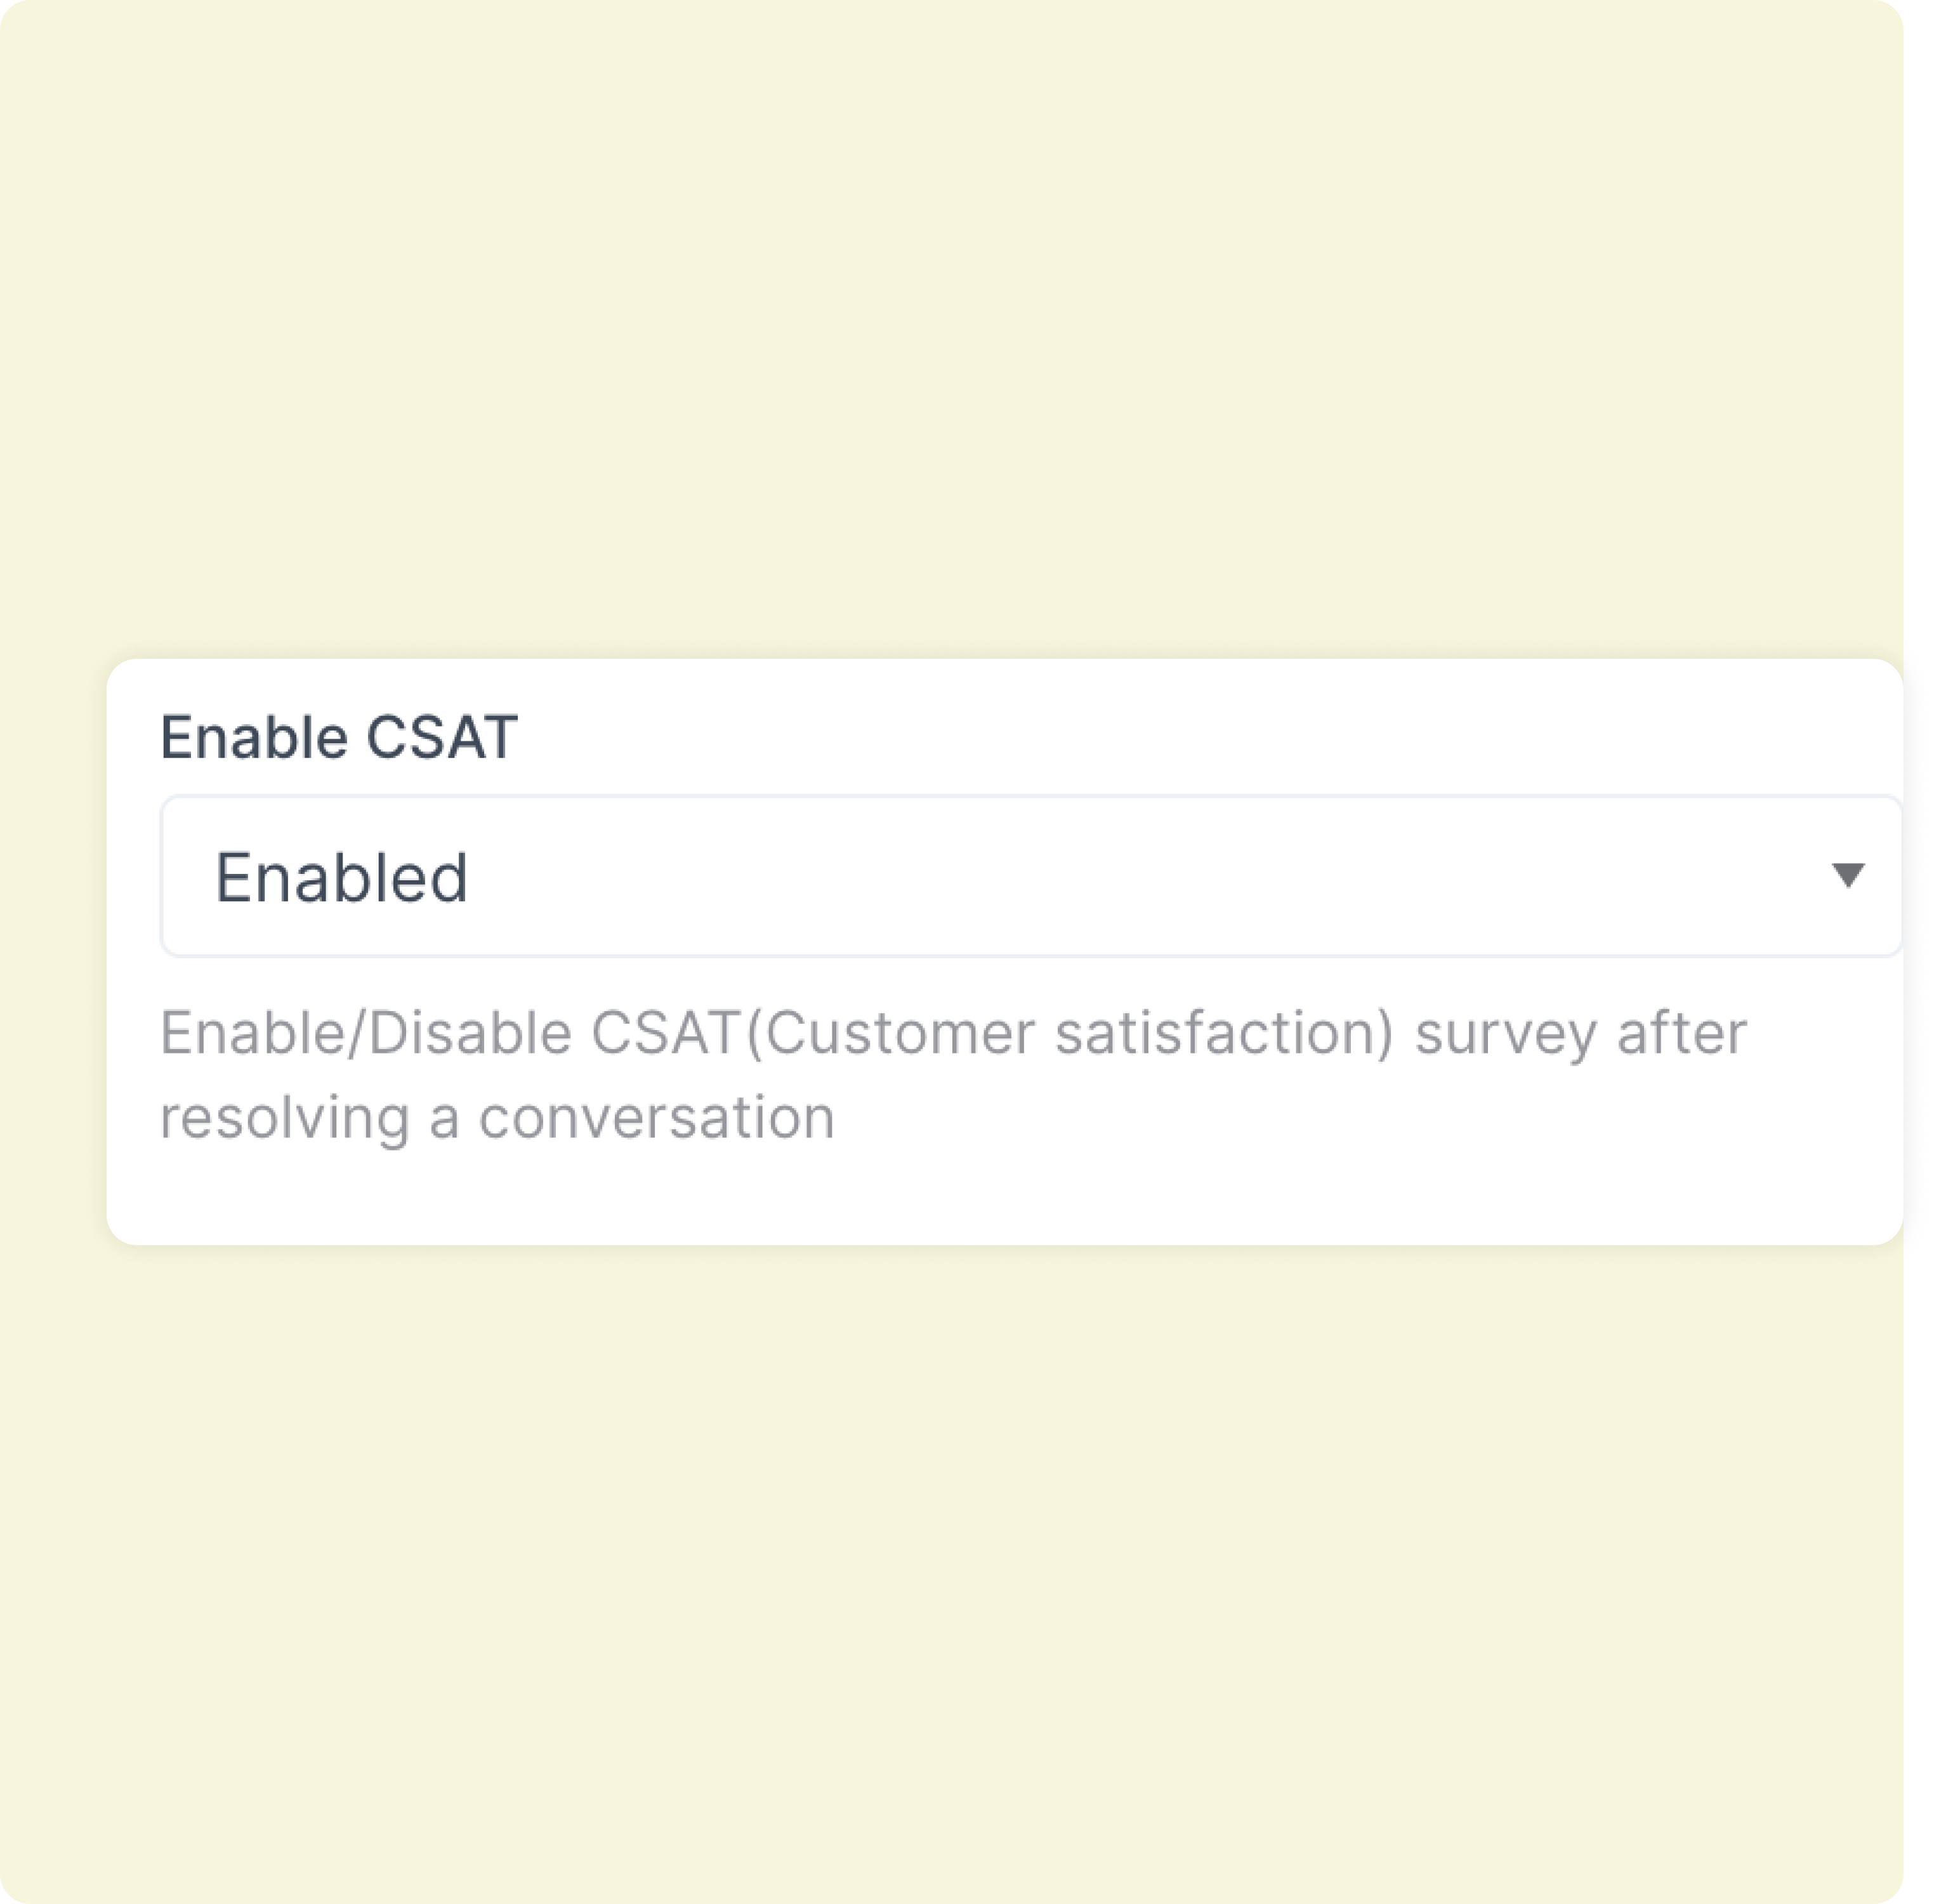  Enable CSAT in a click